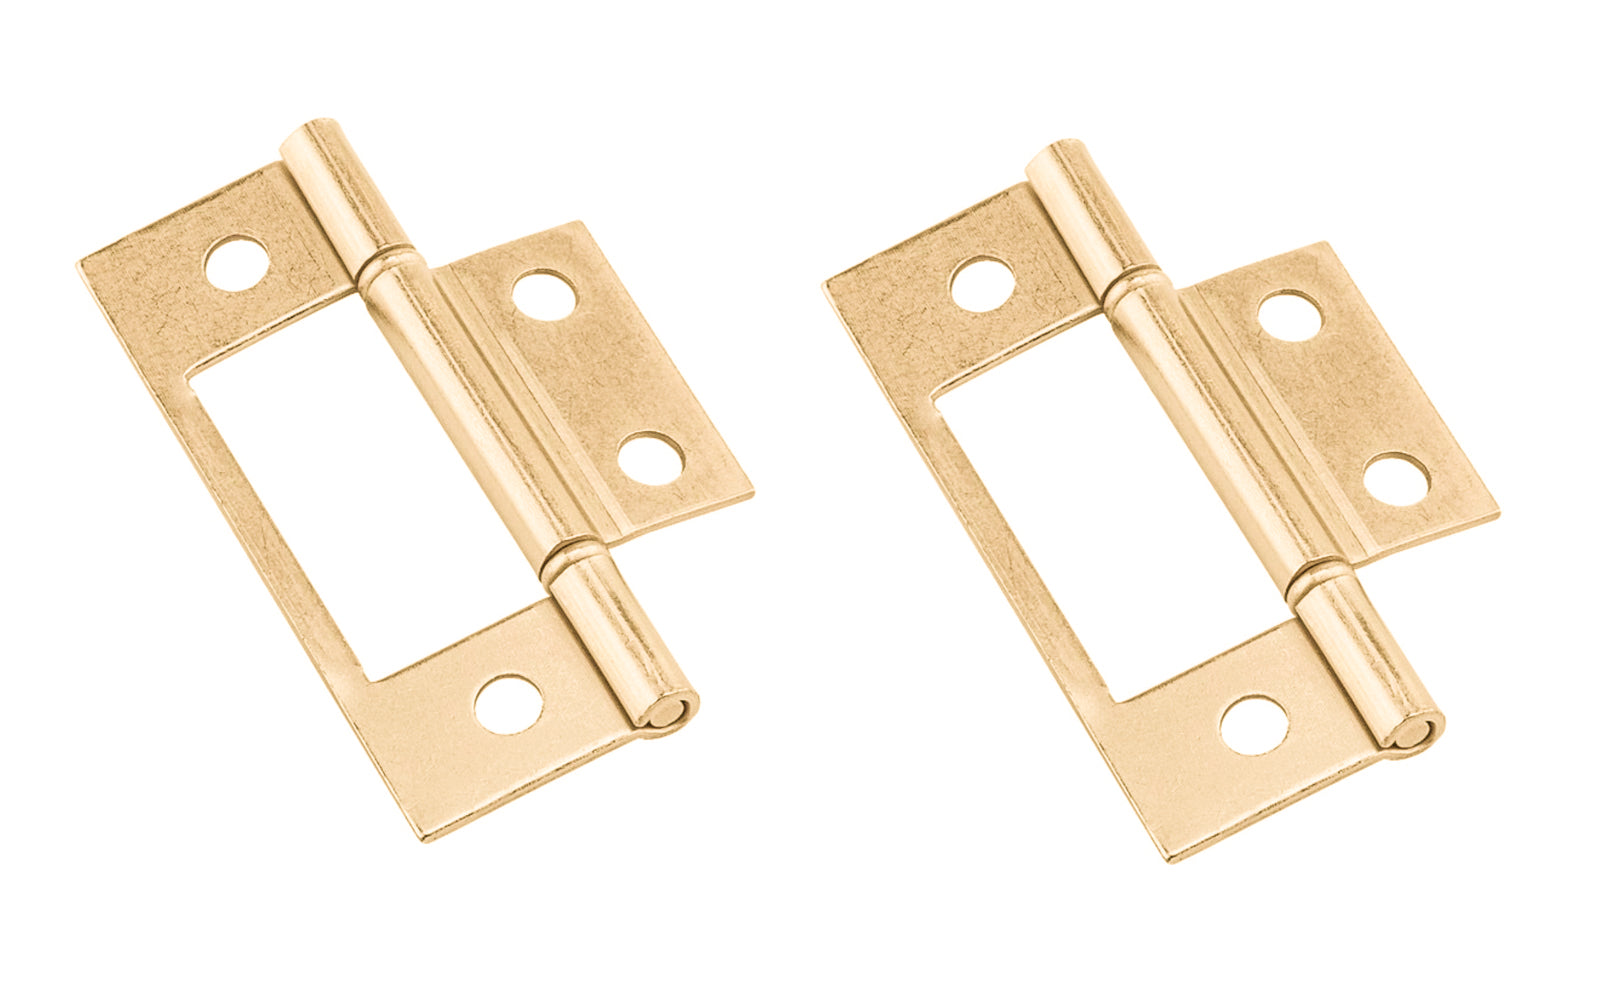 These non mortise hinges are designed for use on bi-fold doors at least 1